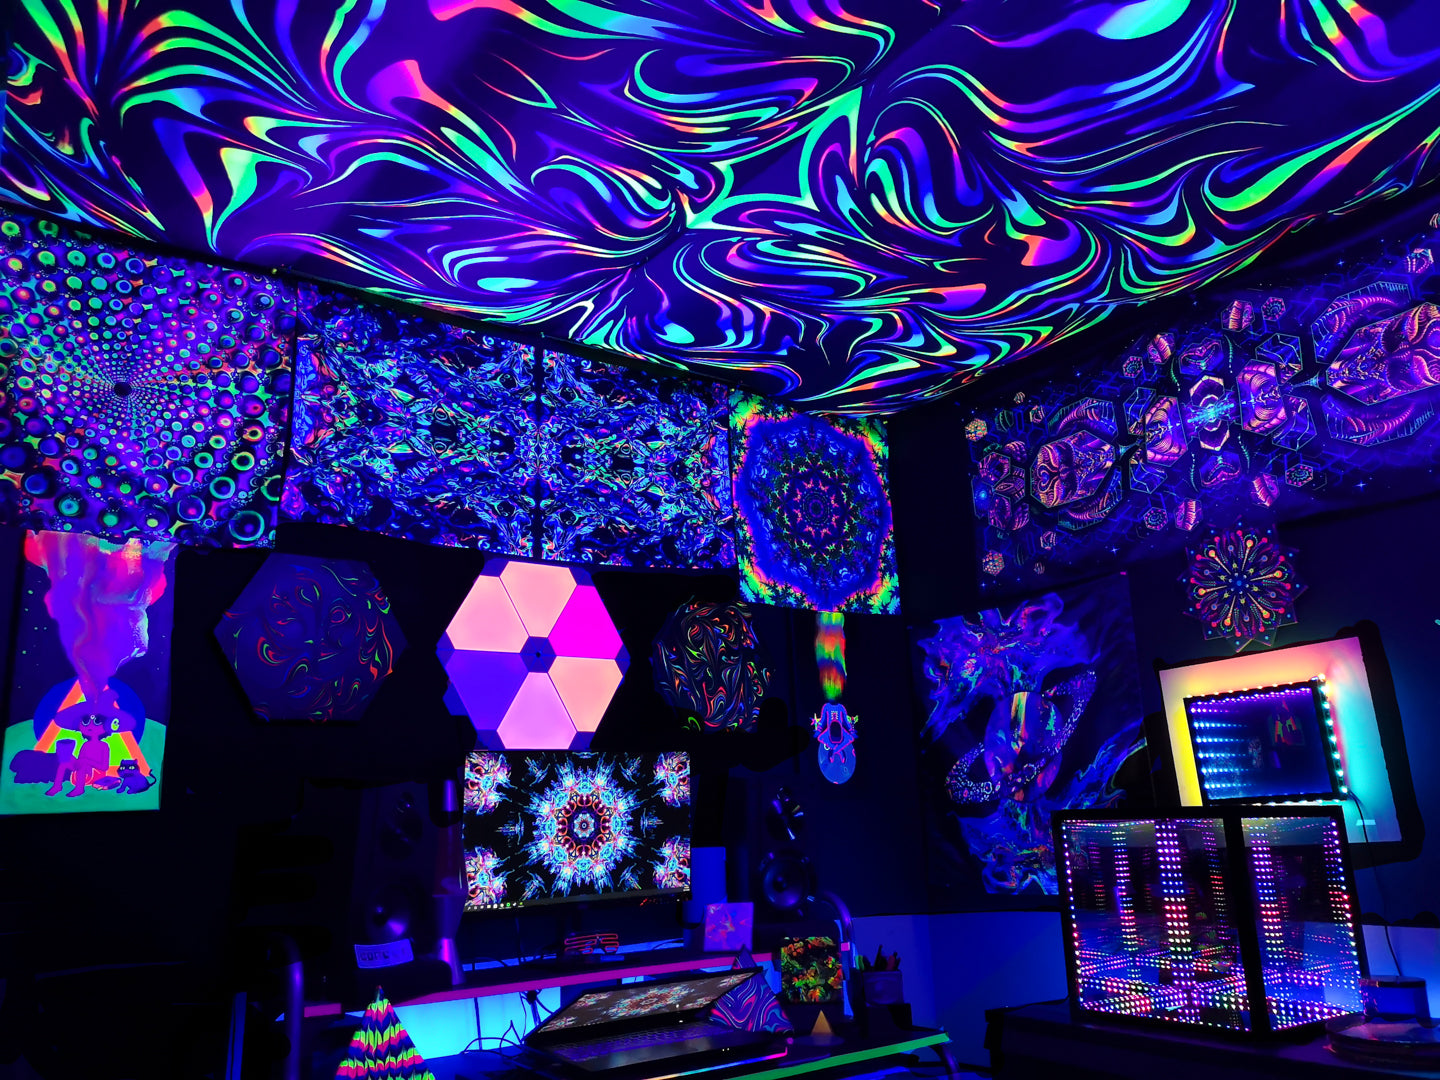 trippy lights for your room